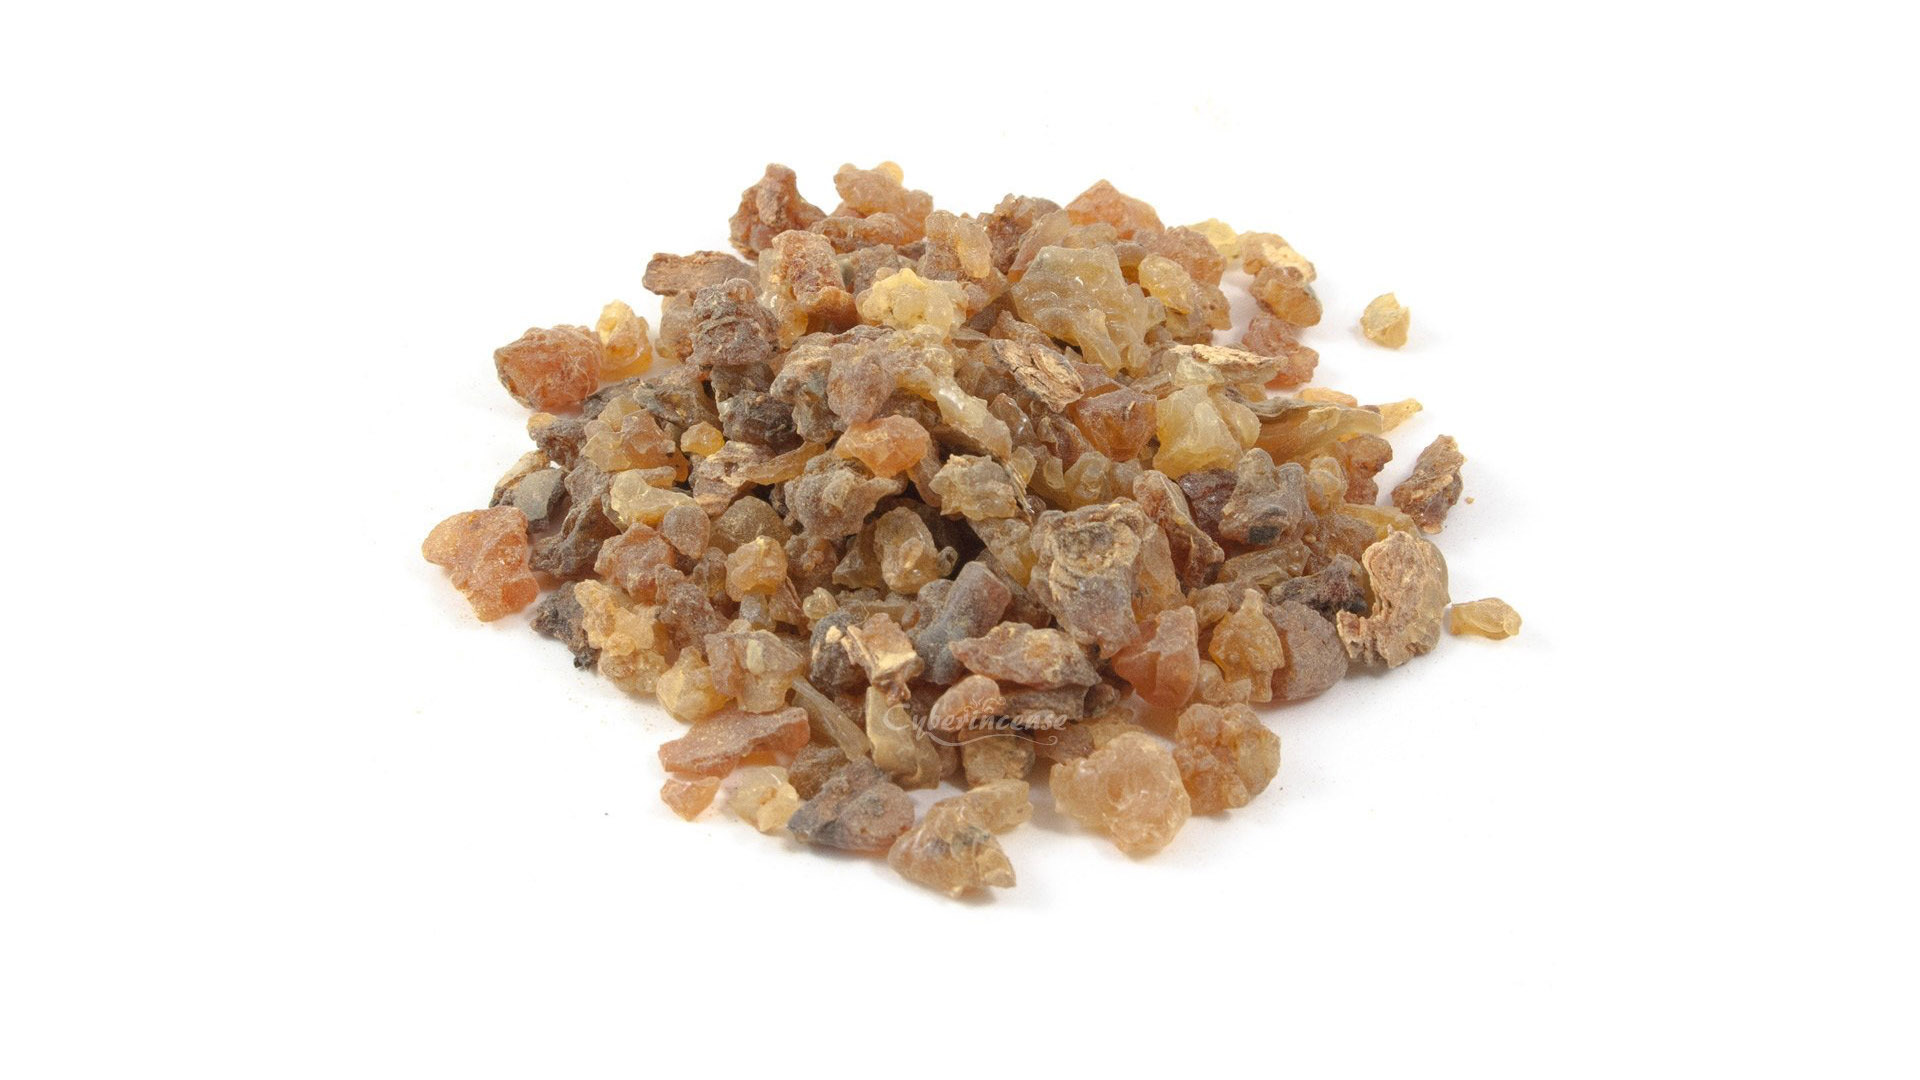 Myrrh is a resin from the Boswellia plant family, along with Frankincense (MEE)